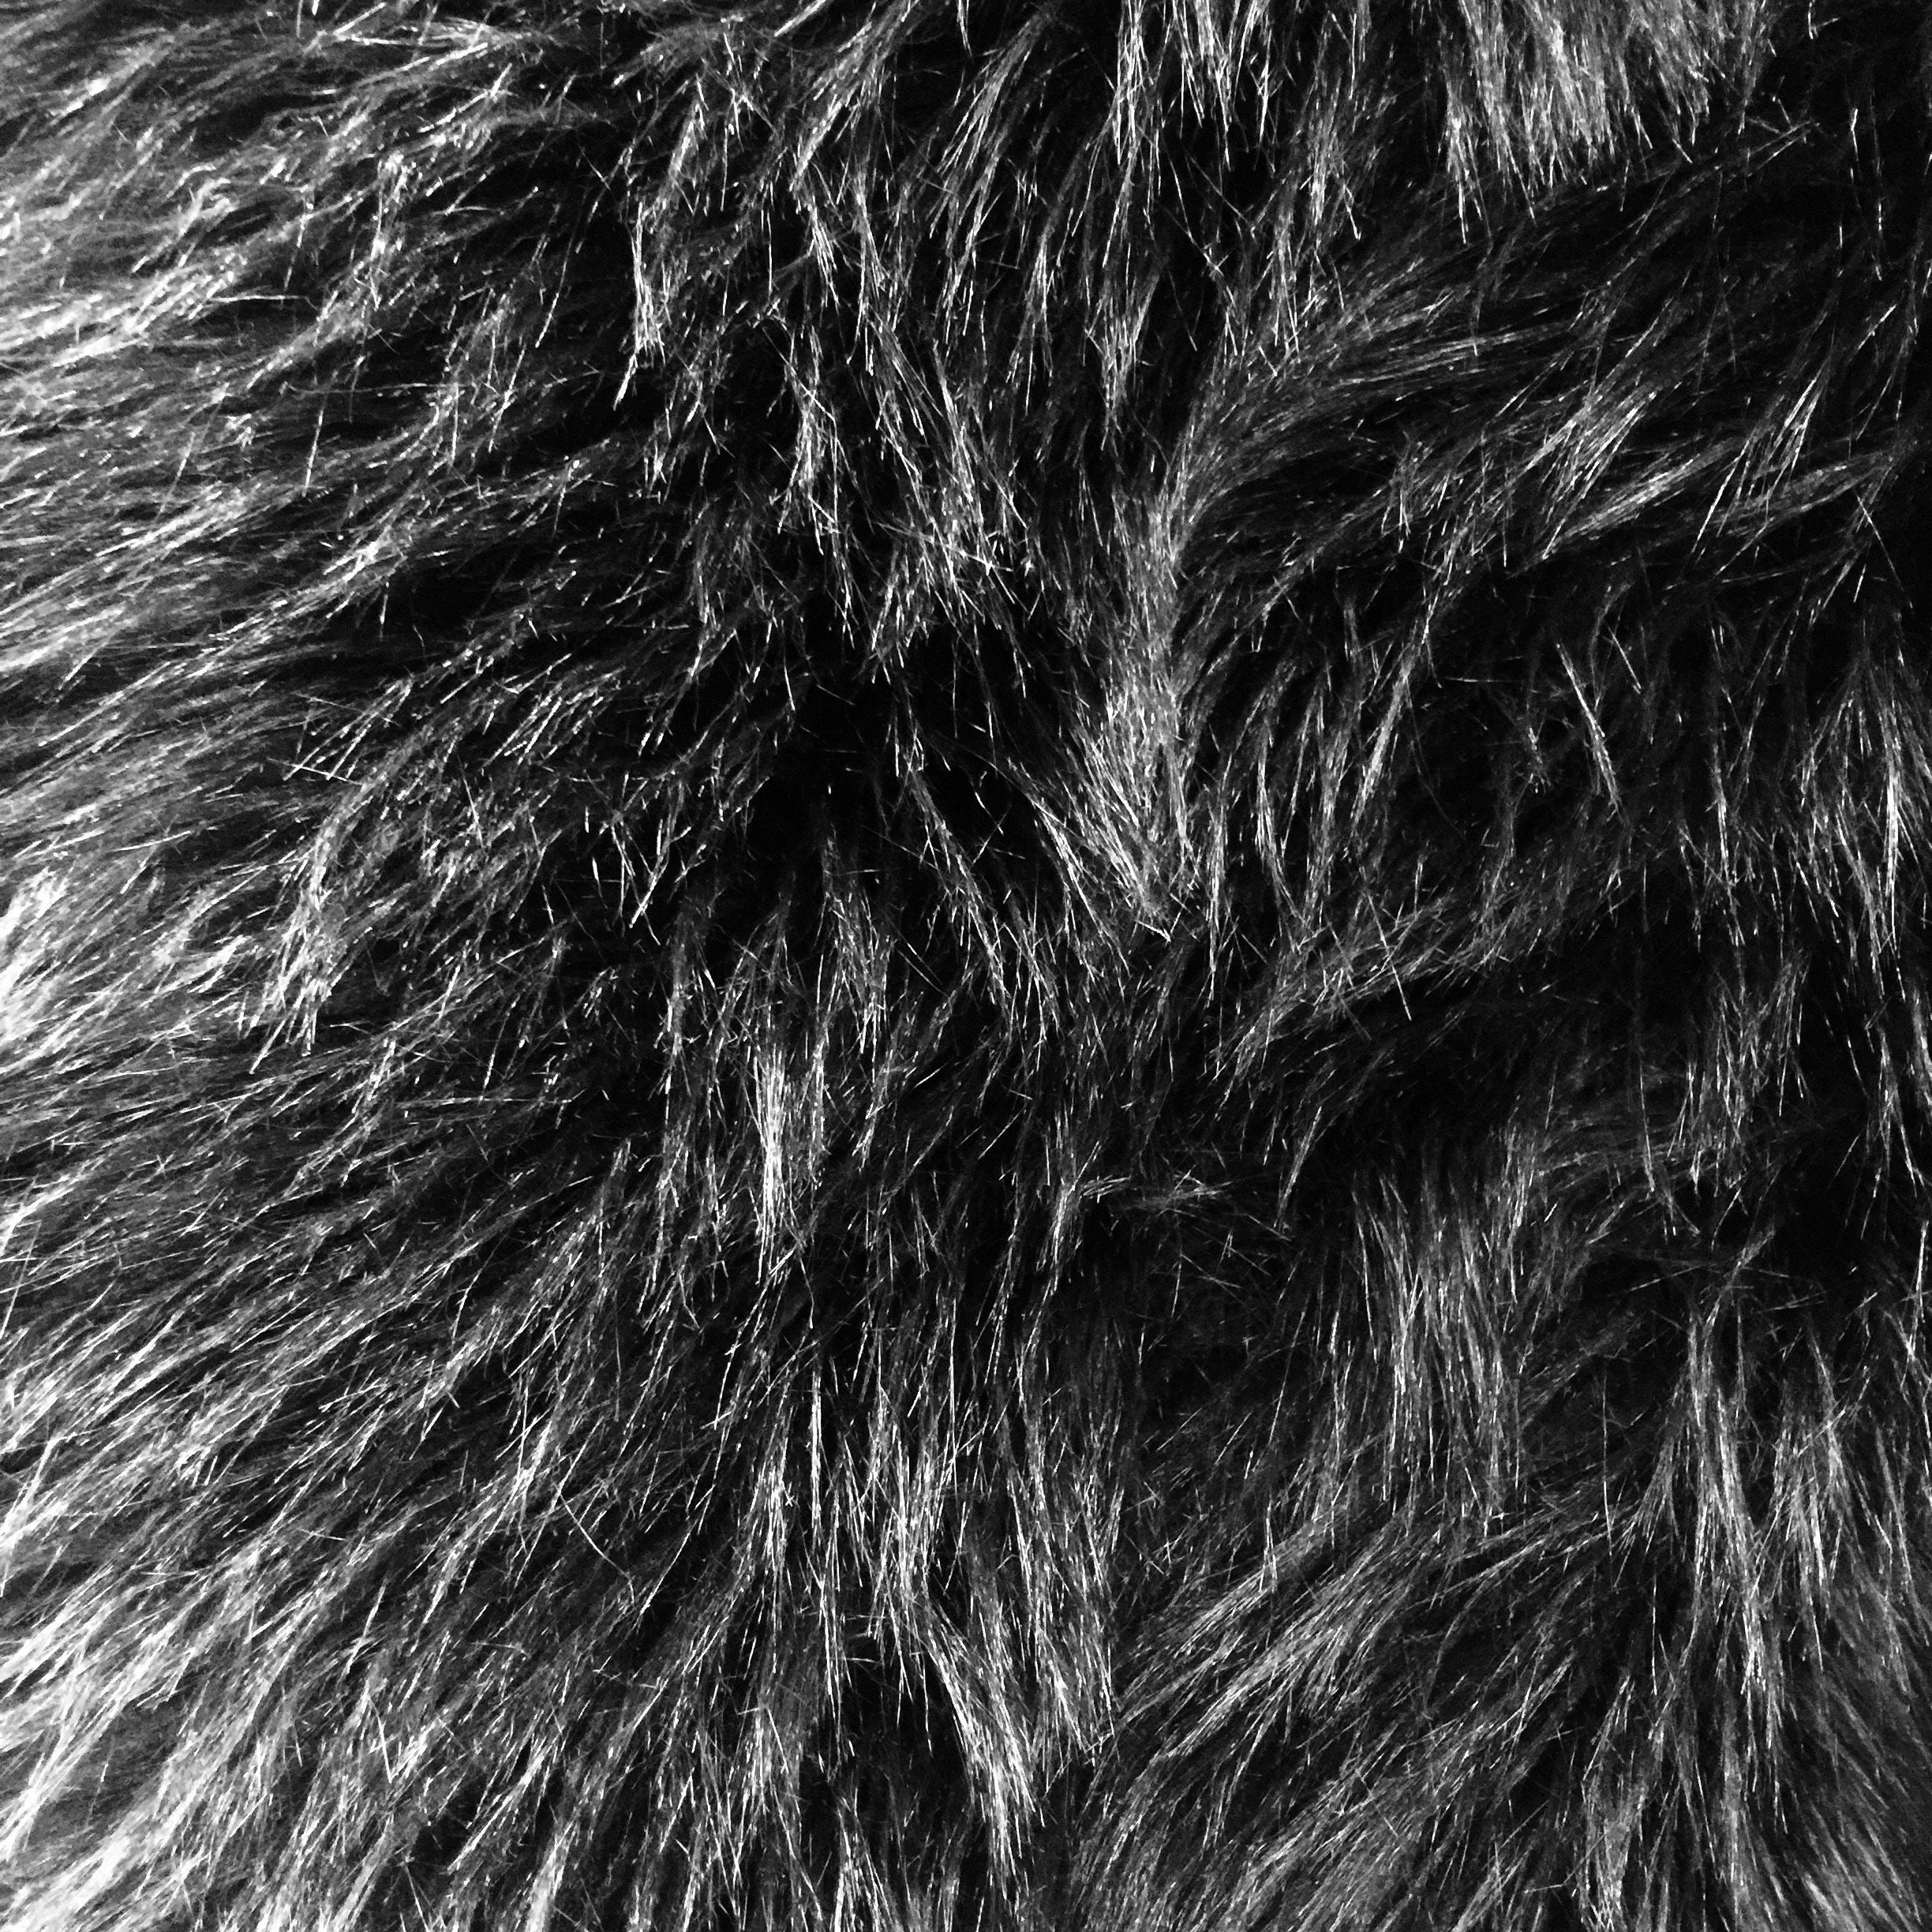 Black Shag Faux Animal Fur by the Yard 58 Roll Long Pile Soft Fake Fur for  DIY Crafts, Costumes, Fur Coats, Clothing, and Blankets 